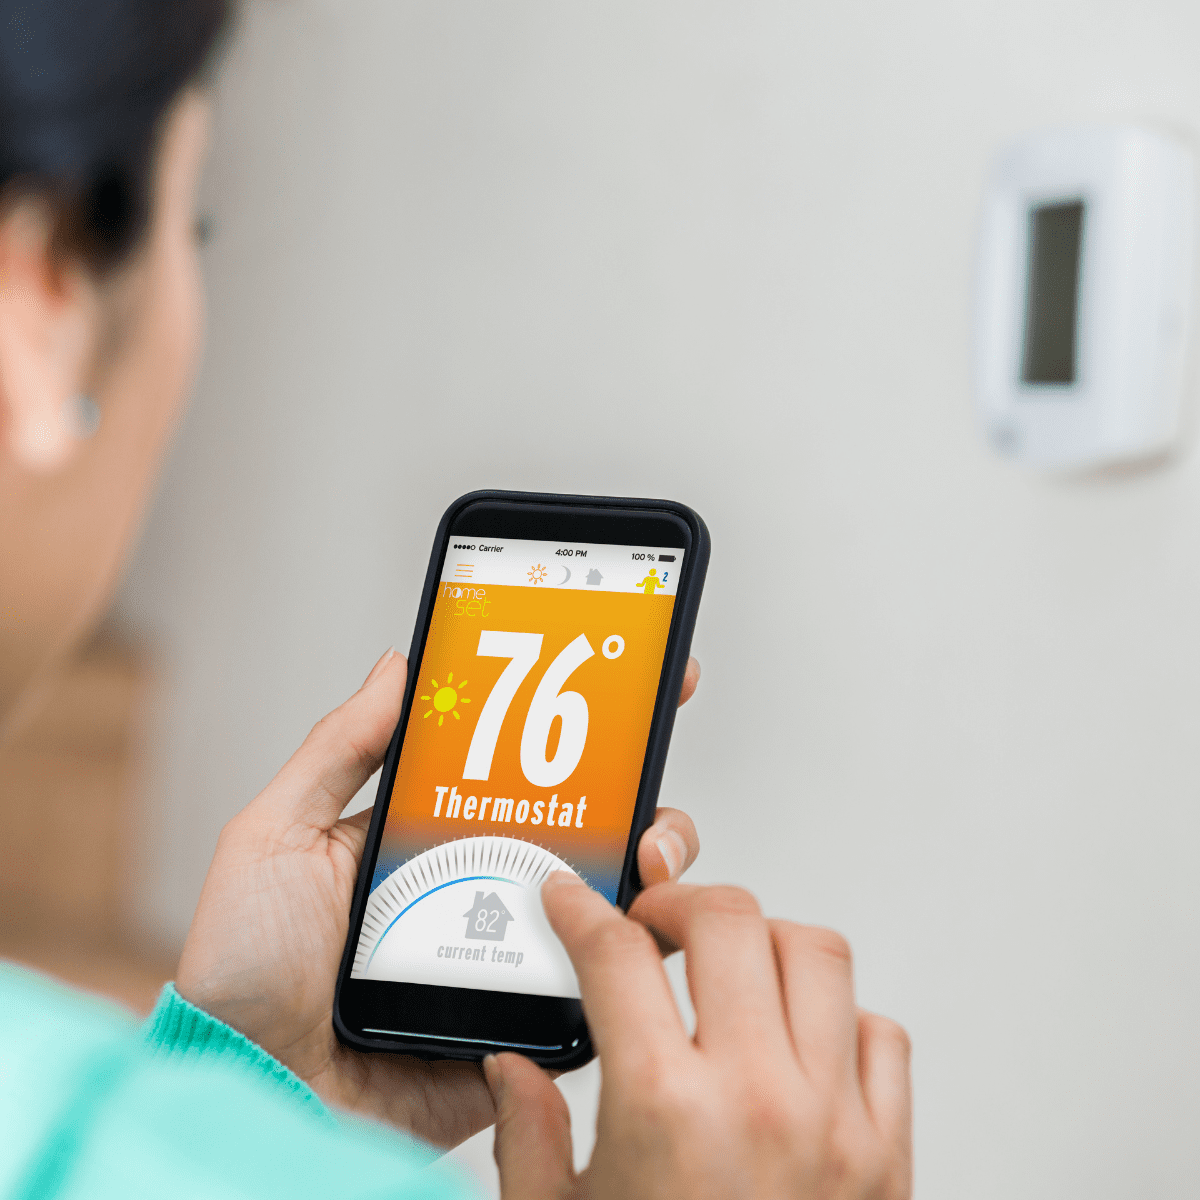 Choose a smart programmable thermostat for your home